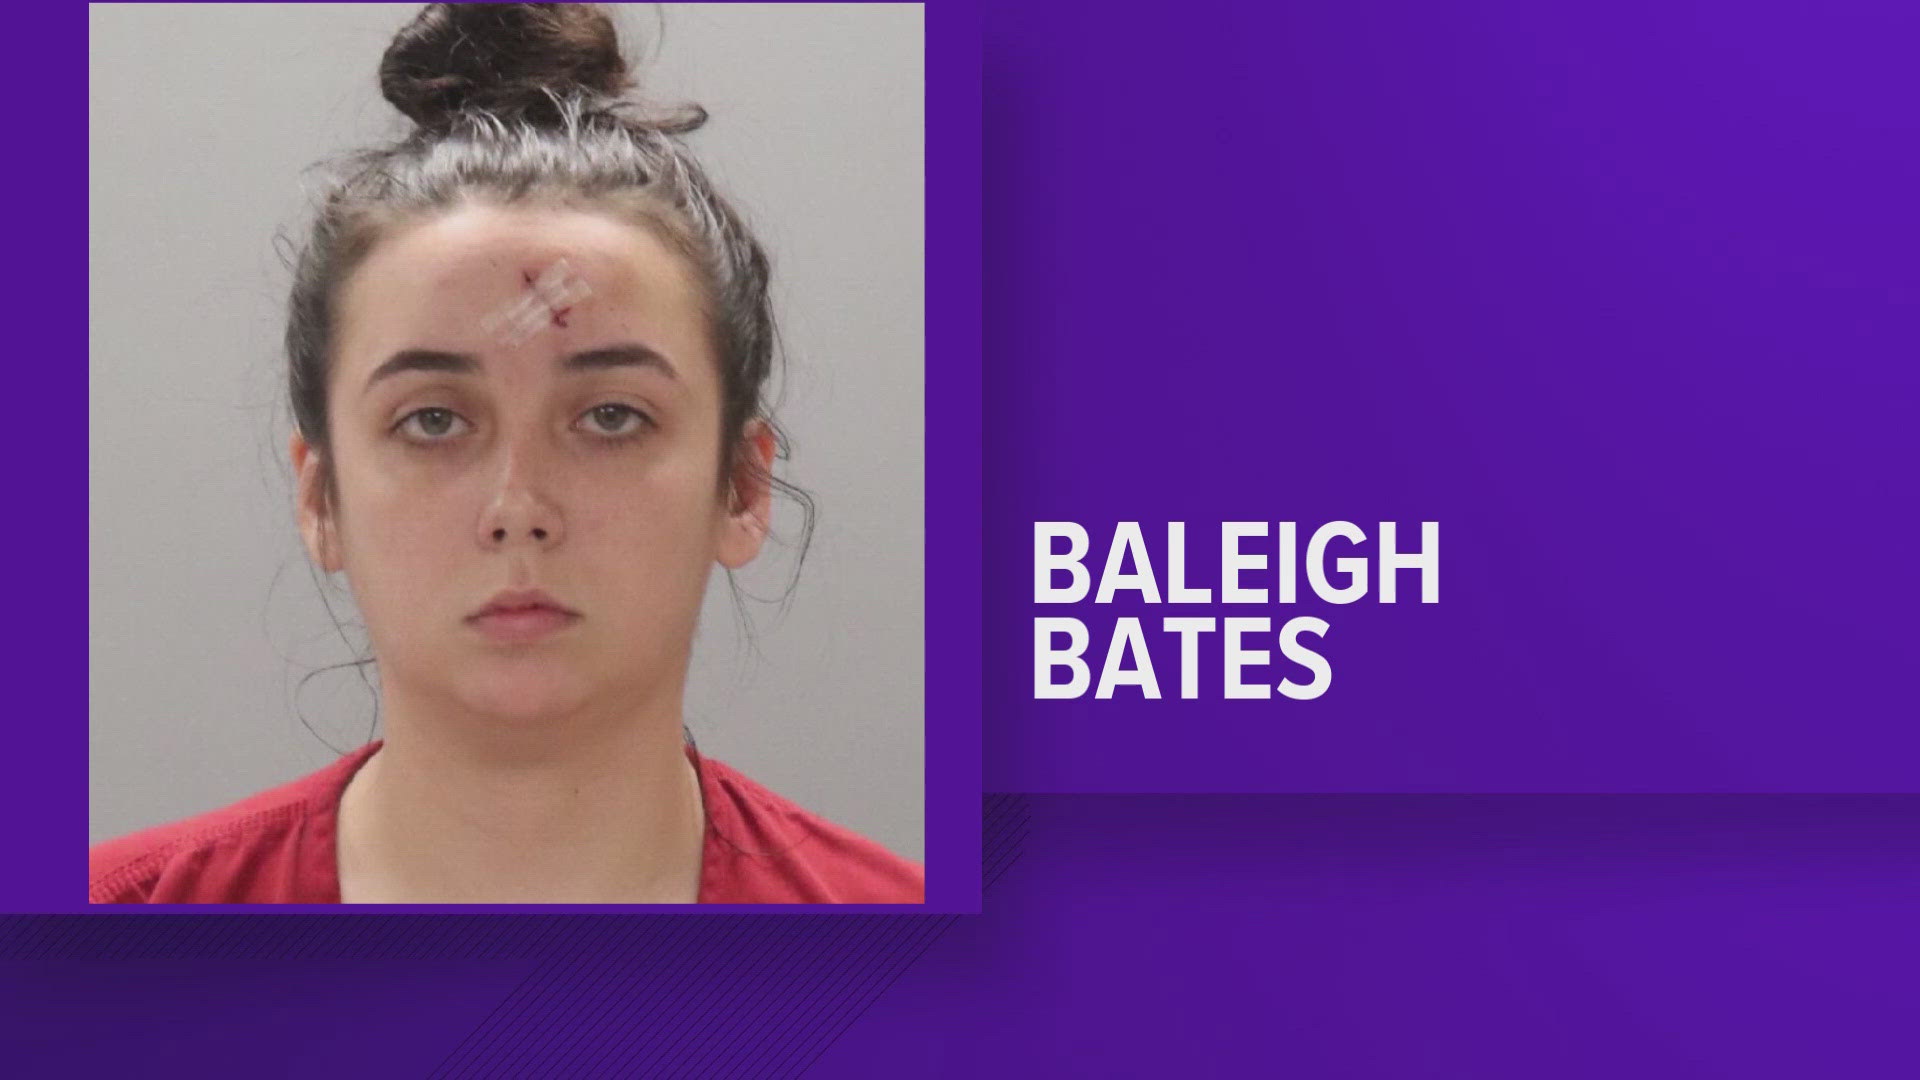 A 25-year-old driver, Baleigh Bates, was believed to be severely intoxicated, the Knoxville Police Department said.